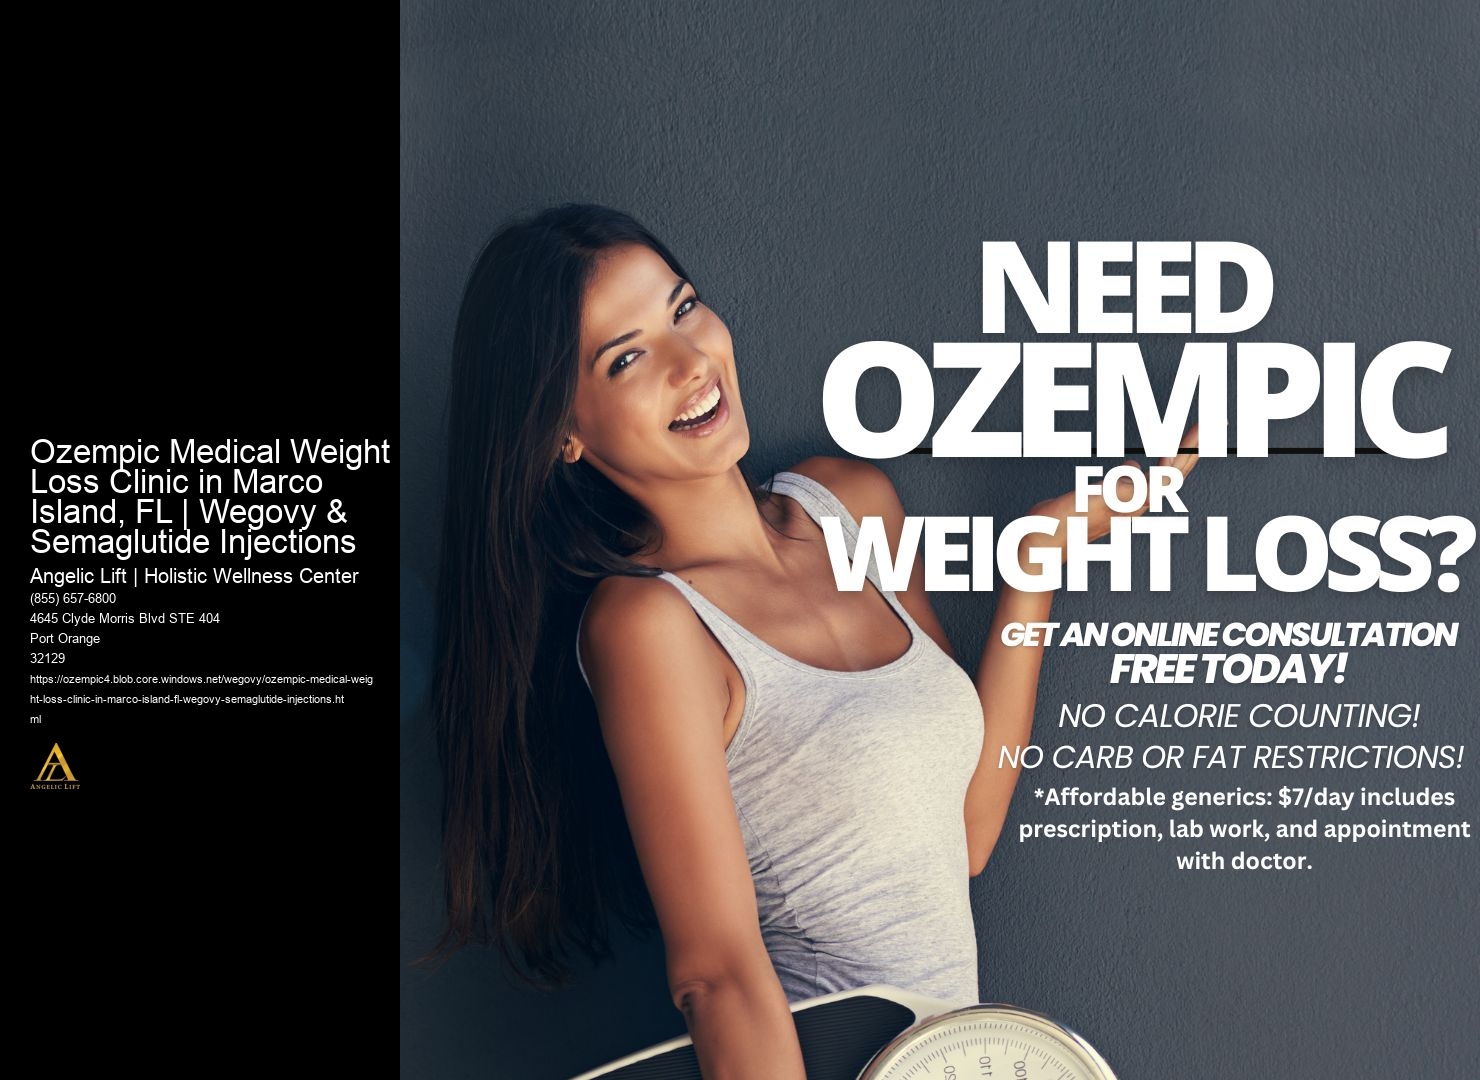 Ozempic Medical Weight Loss Clinic in Marco Island, FL | Wegovy & Semaglutide Injections